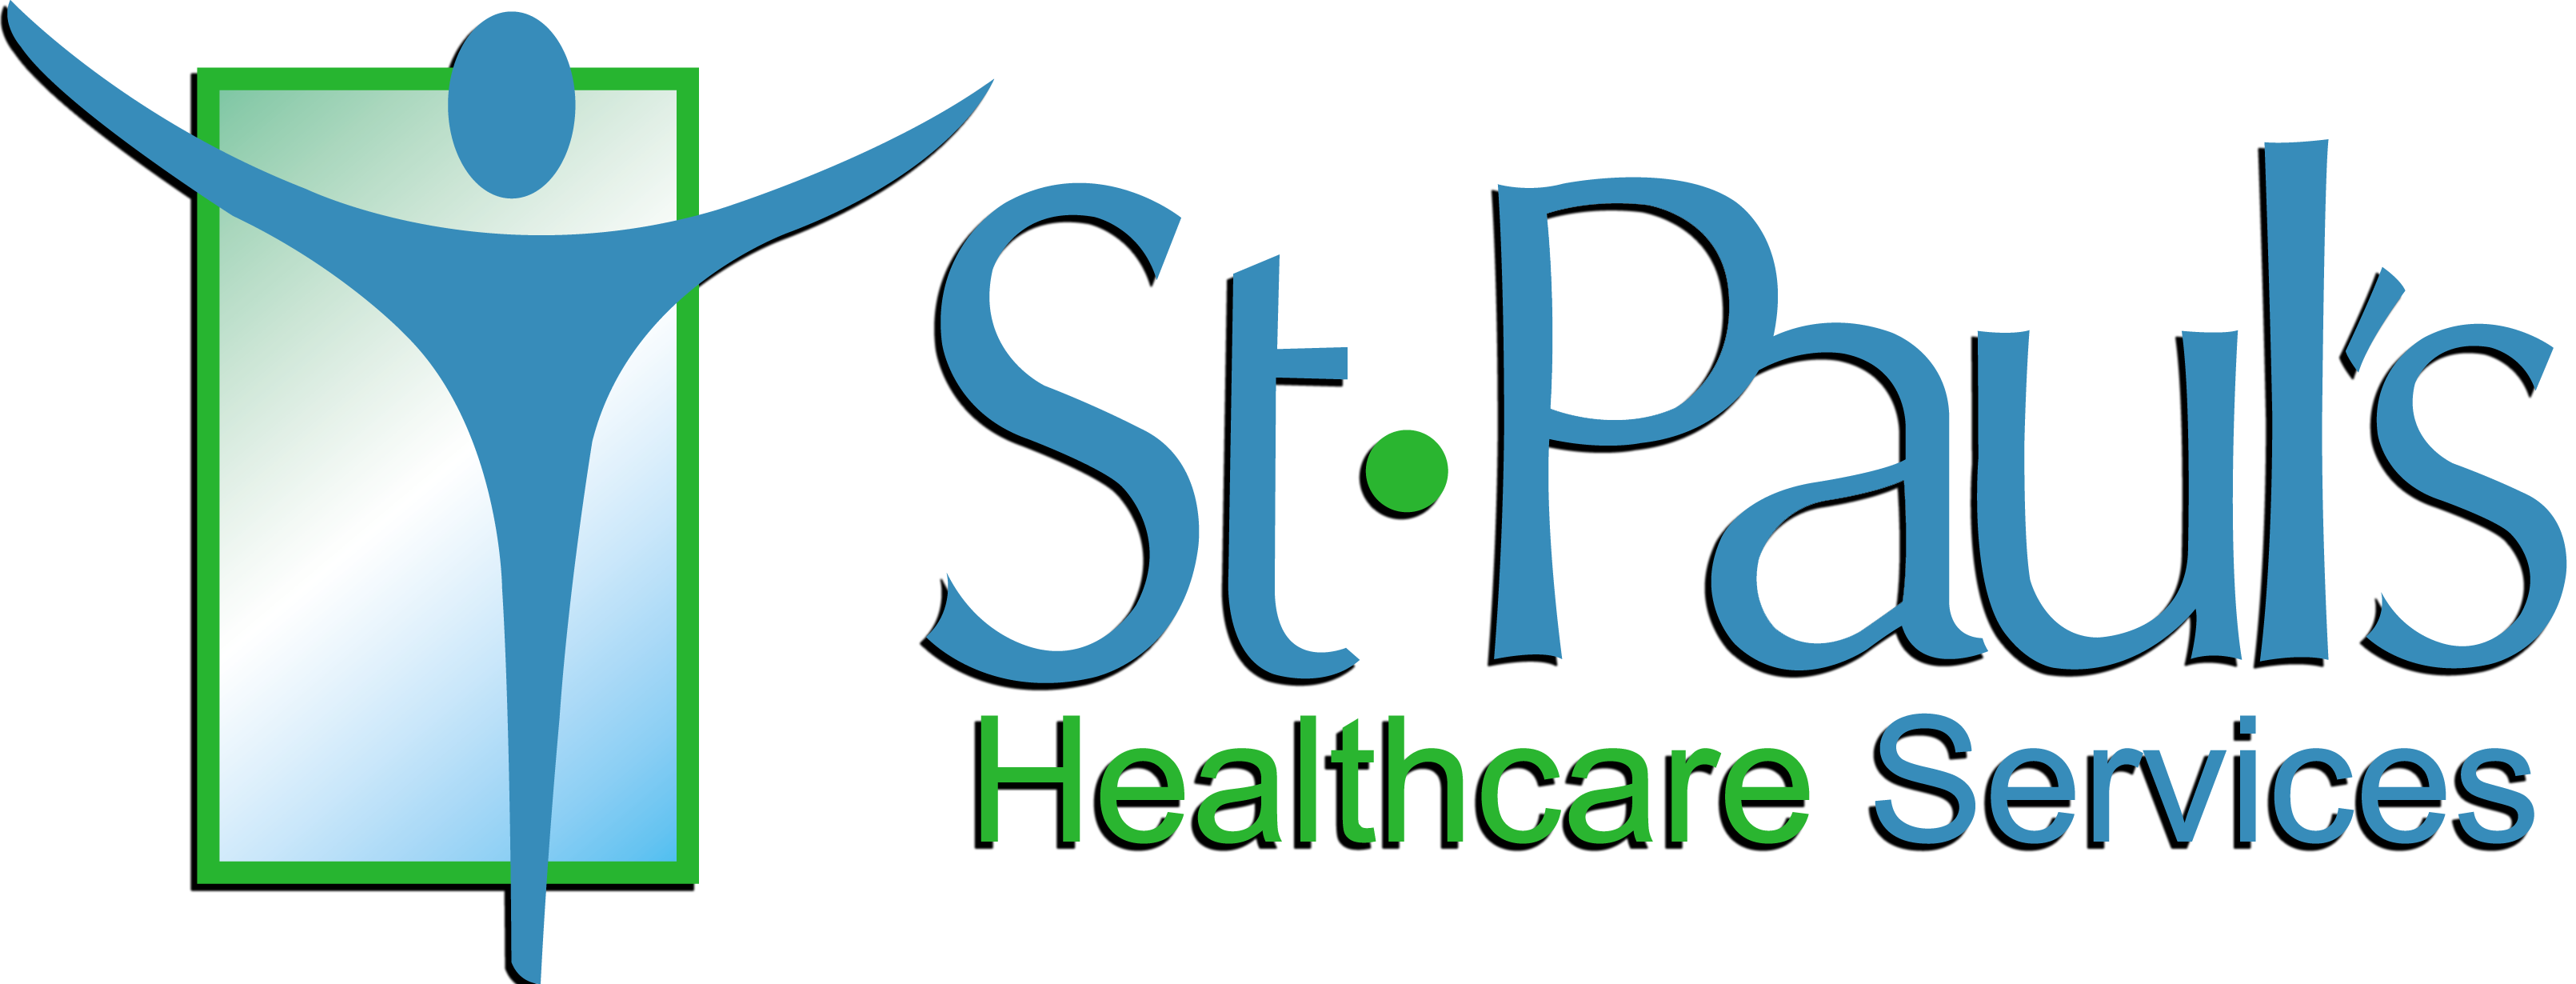 St. Pauls Health Care Services